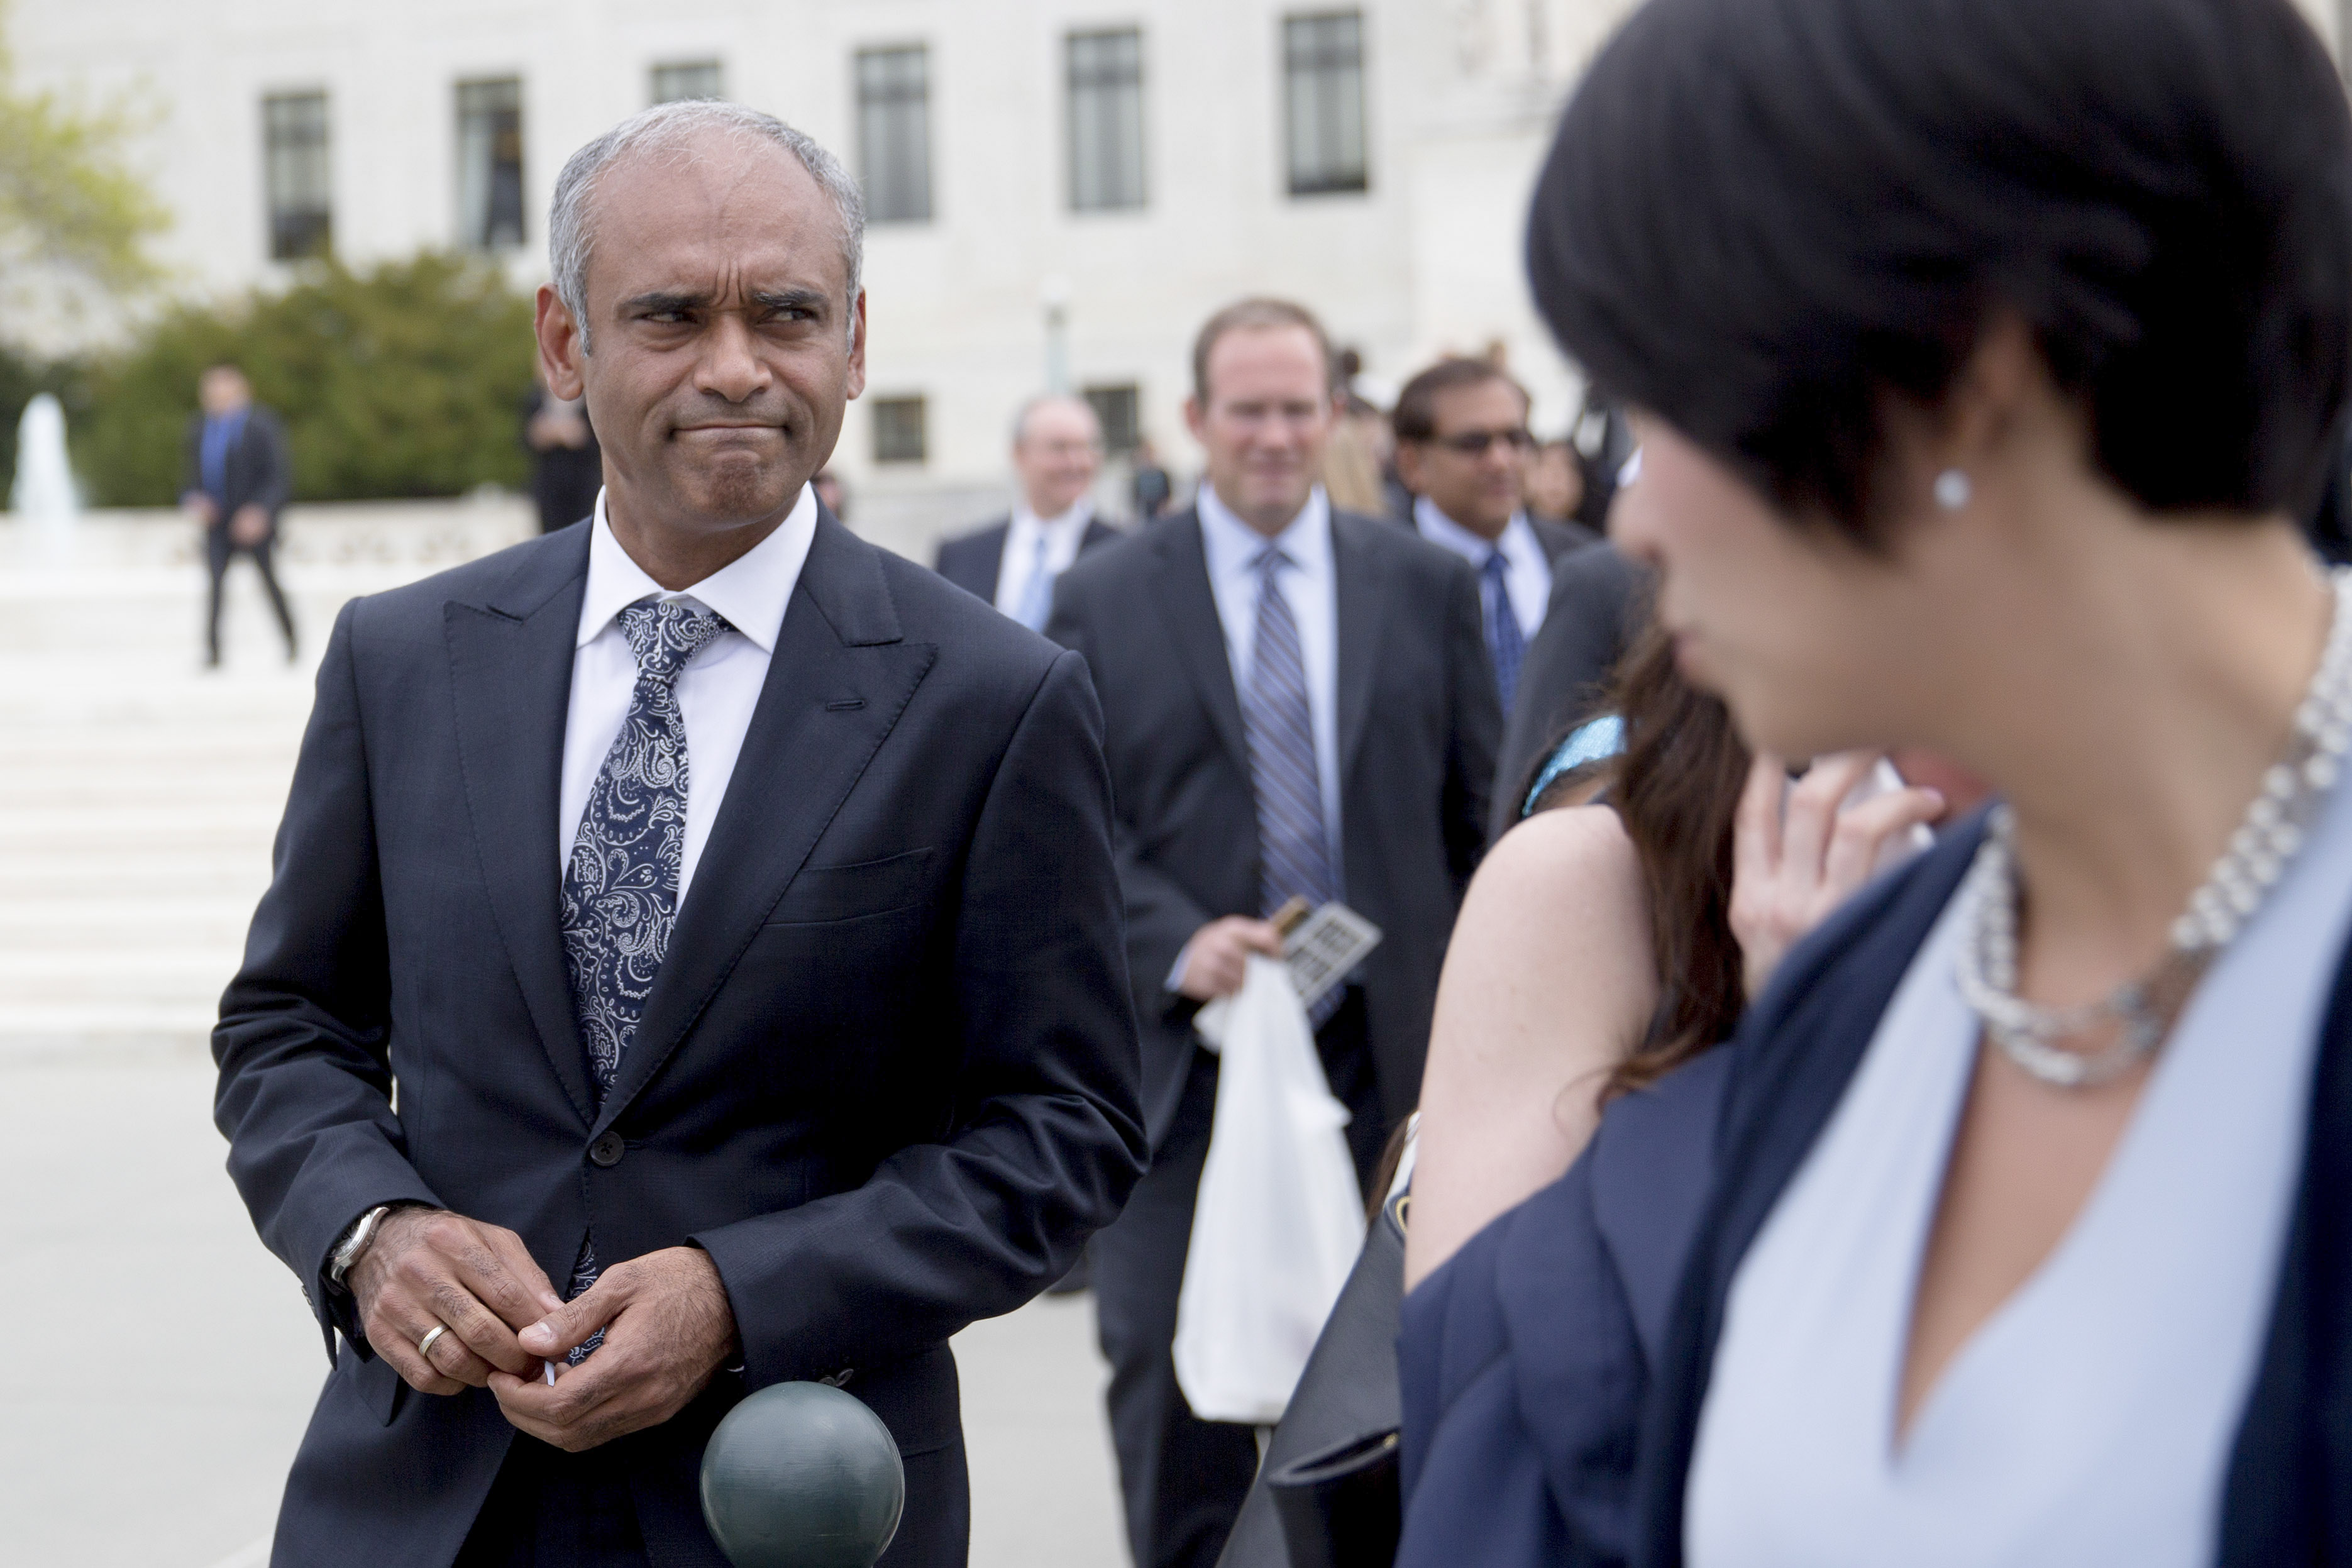 Chet Kanojia, chief executive officer of Aereo Inc., left, leaves the U.S. Supreme Court following oral arguments by Aereo Inc. and American Broadcasting Companies Inc. in Washington, D.C., U.S., on Tuesday, April 22, 2014. (Bloomberg&amp;mdash;Bloomberg via Getty Images)